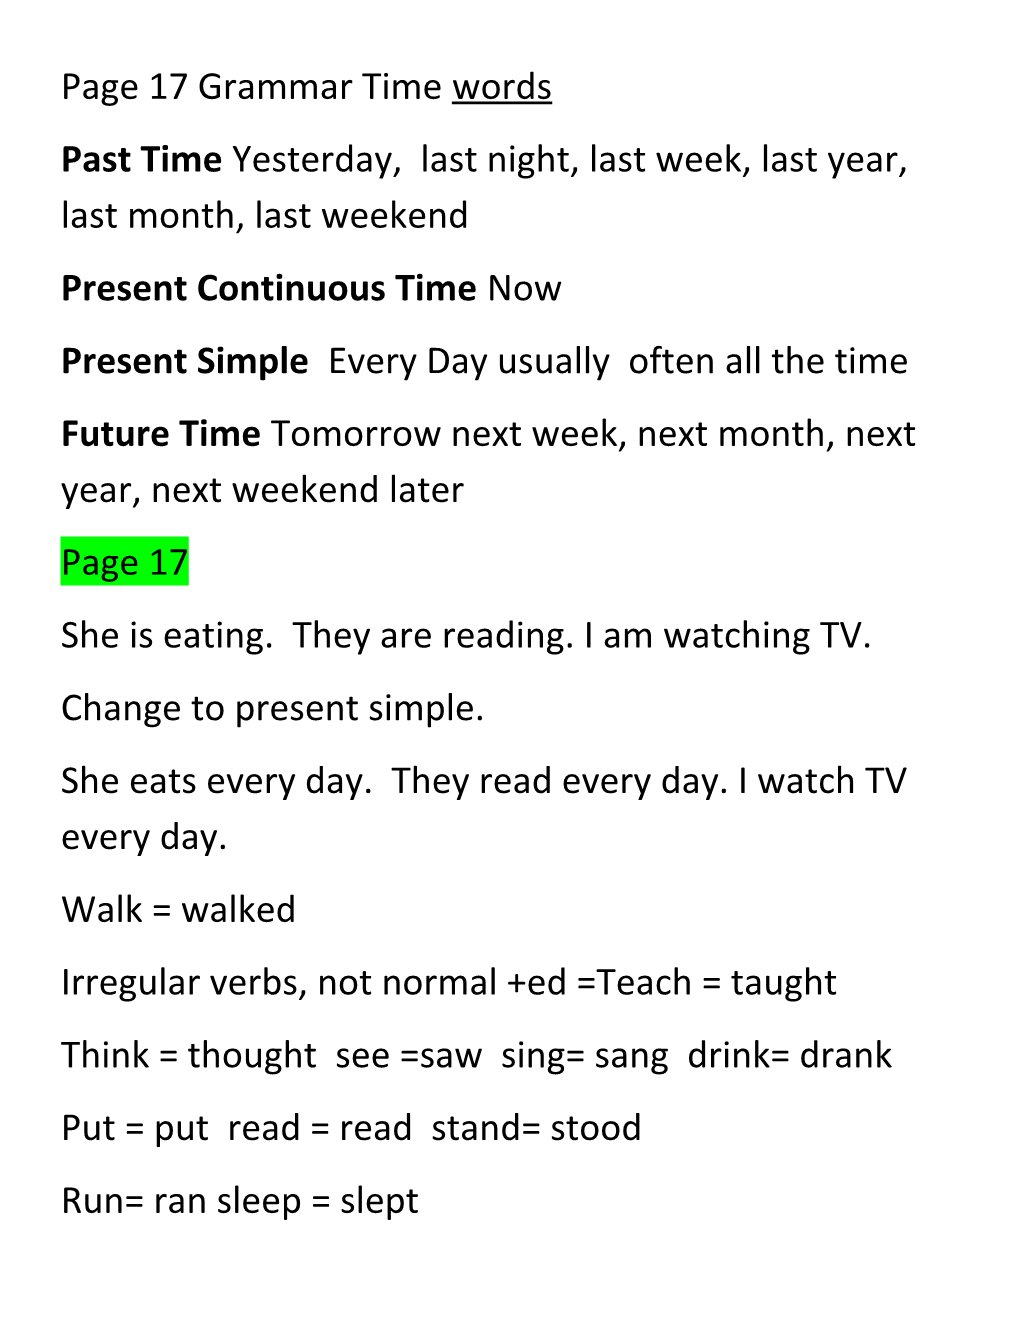 Page 17 Grammar Time Words